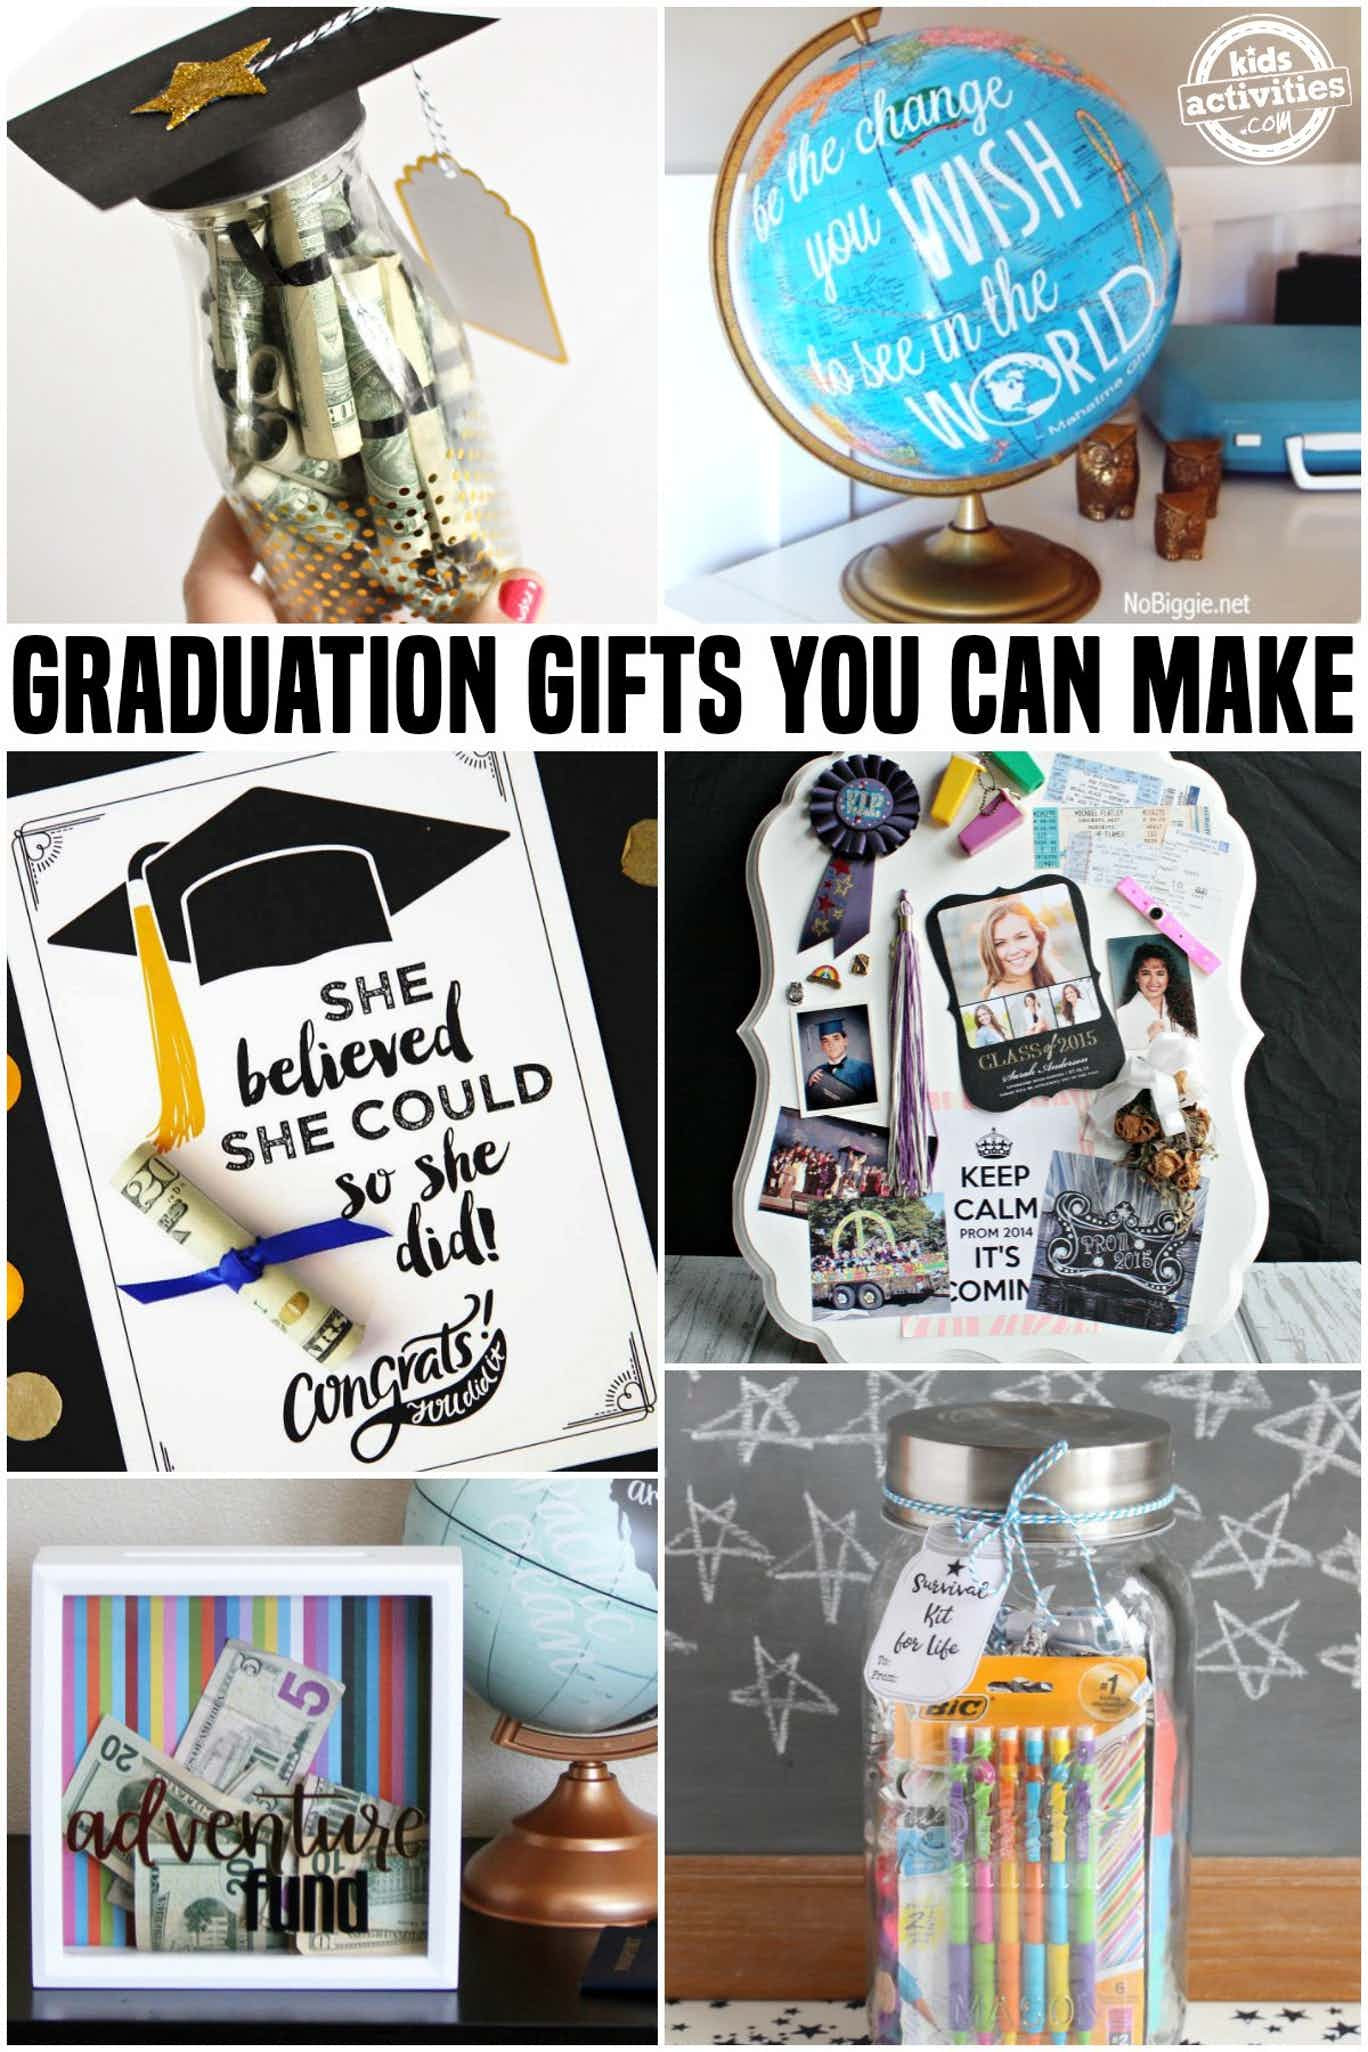 Graduation Gift Ideas Pinterest
 Awesome Graduation Gifts You Can Make At Home